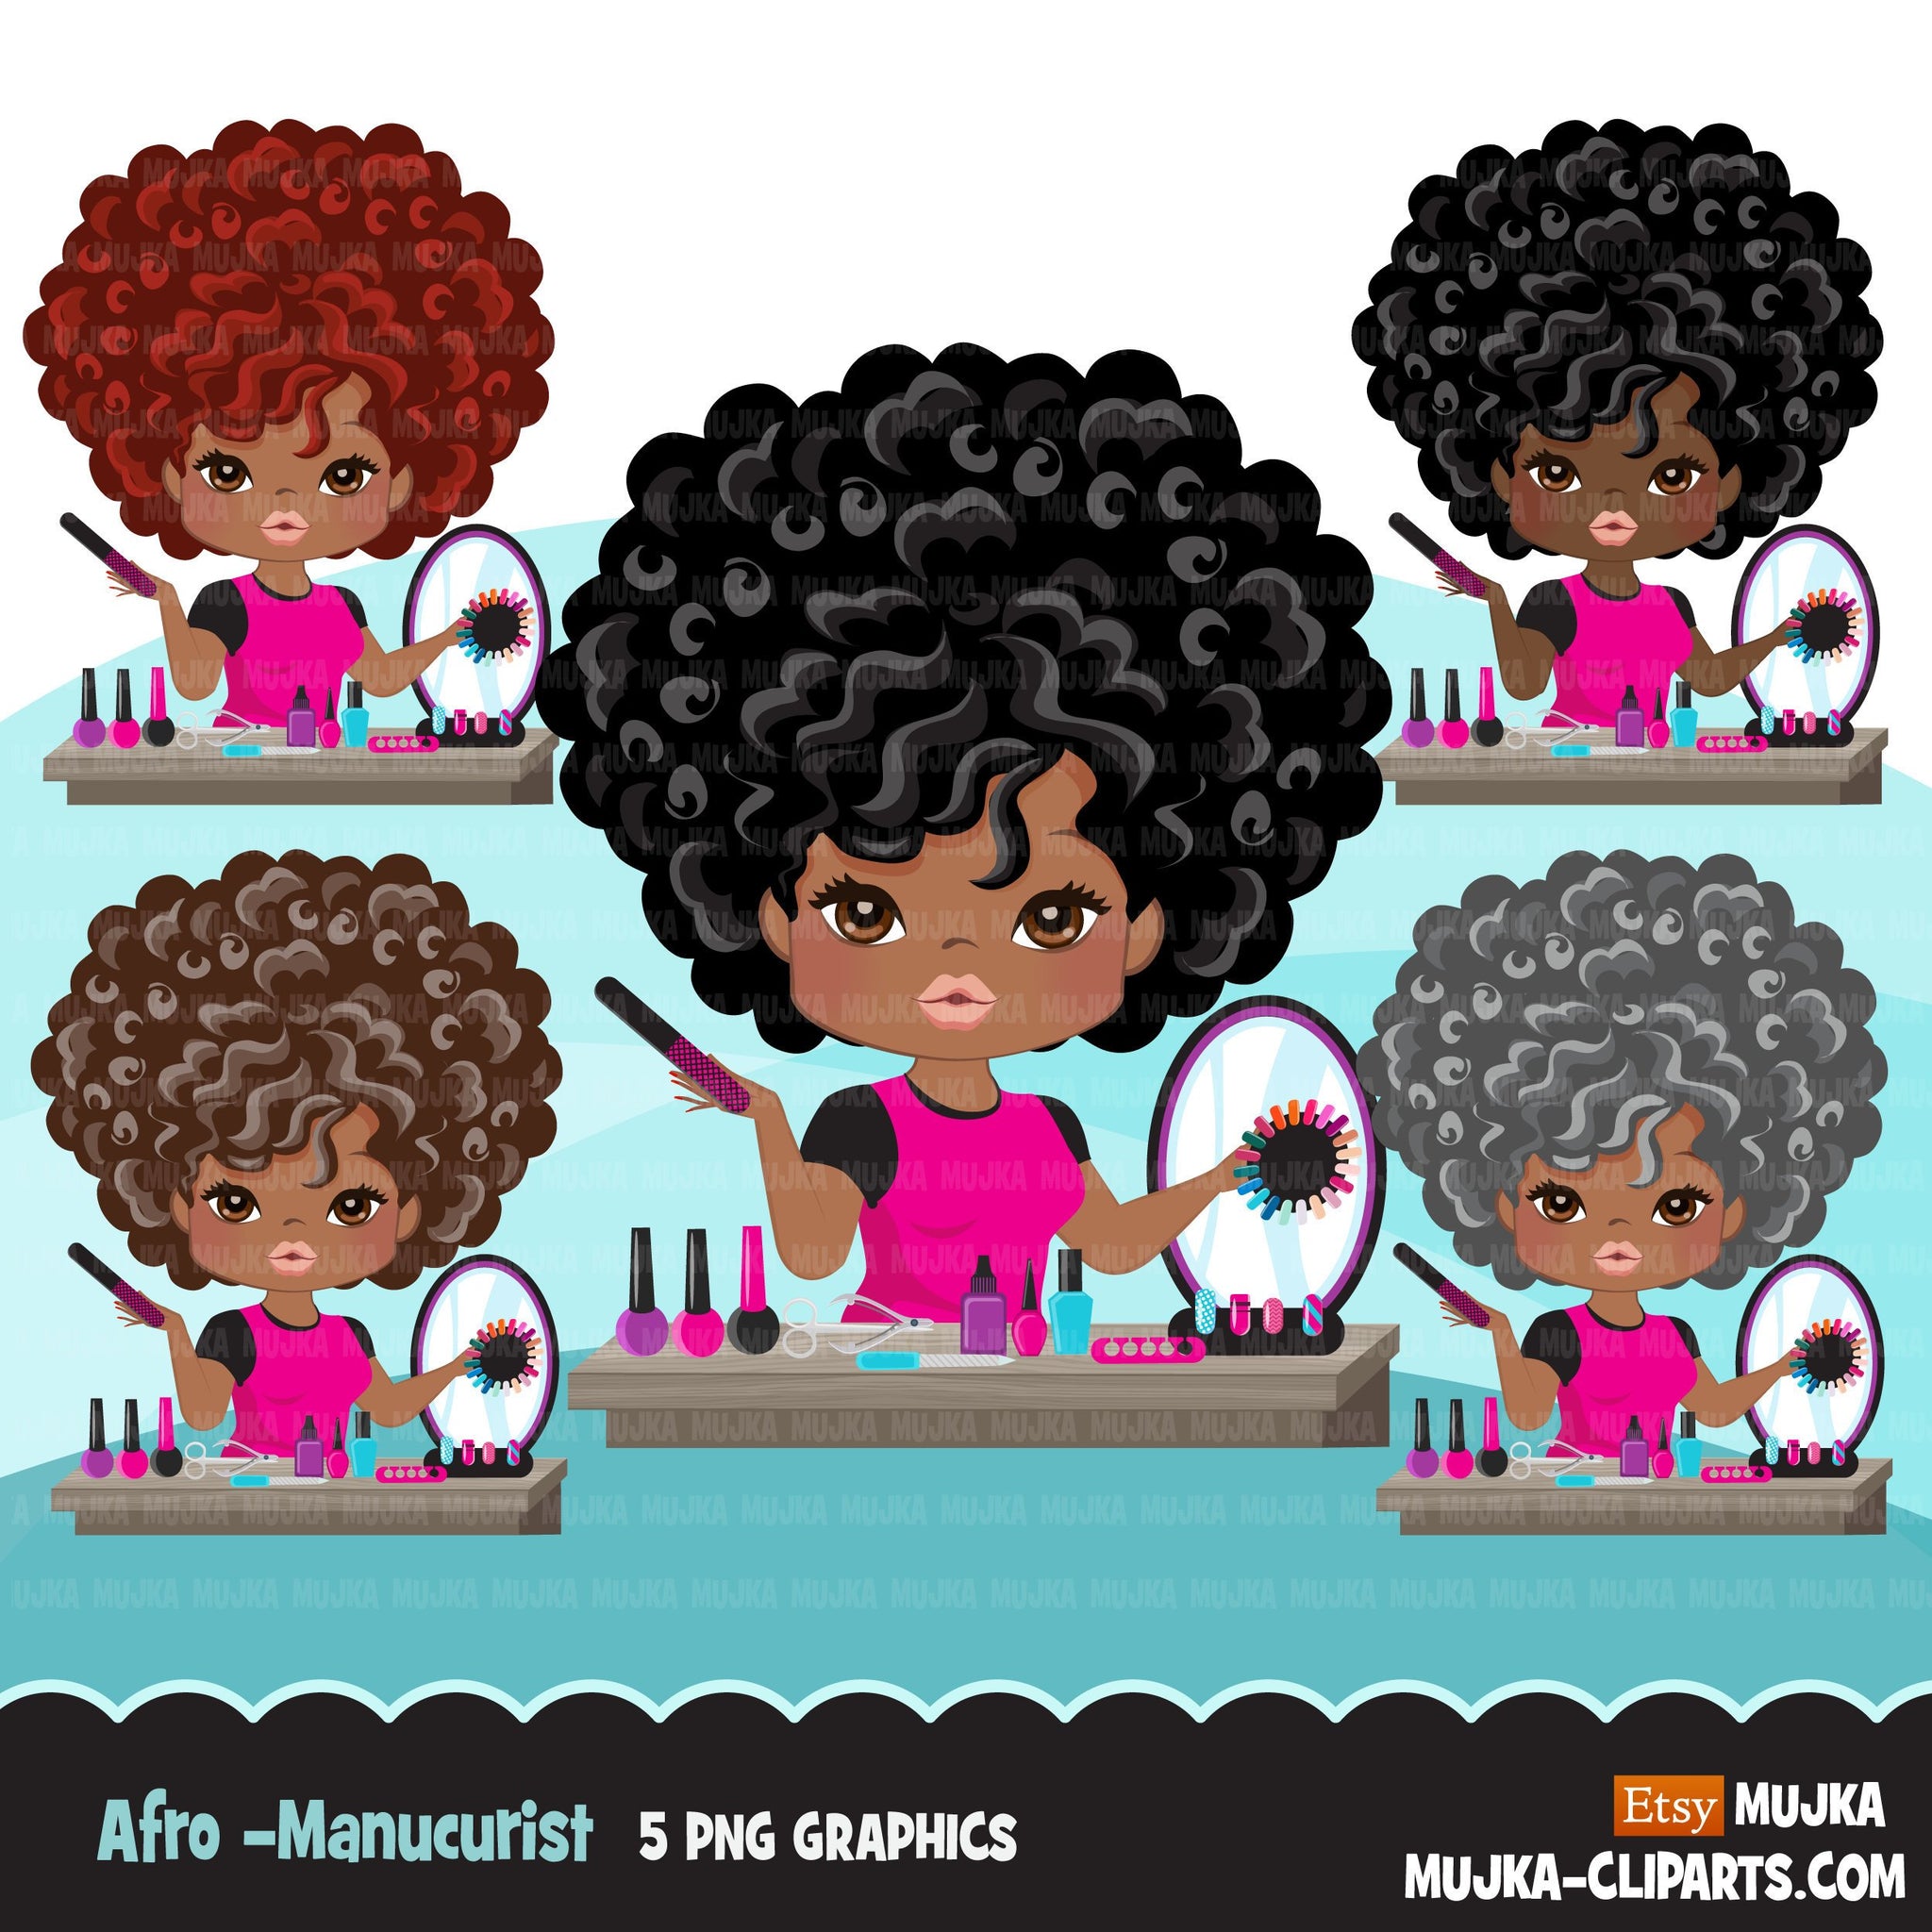 Afro Woman manicurist avatar clipart with nail art graphics girl, print and cut T-Shirt Designs, nail technician clip art